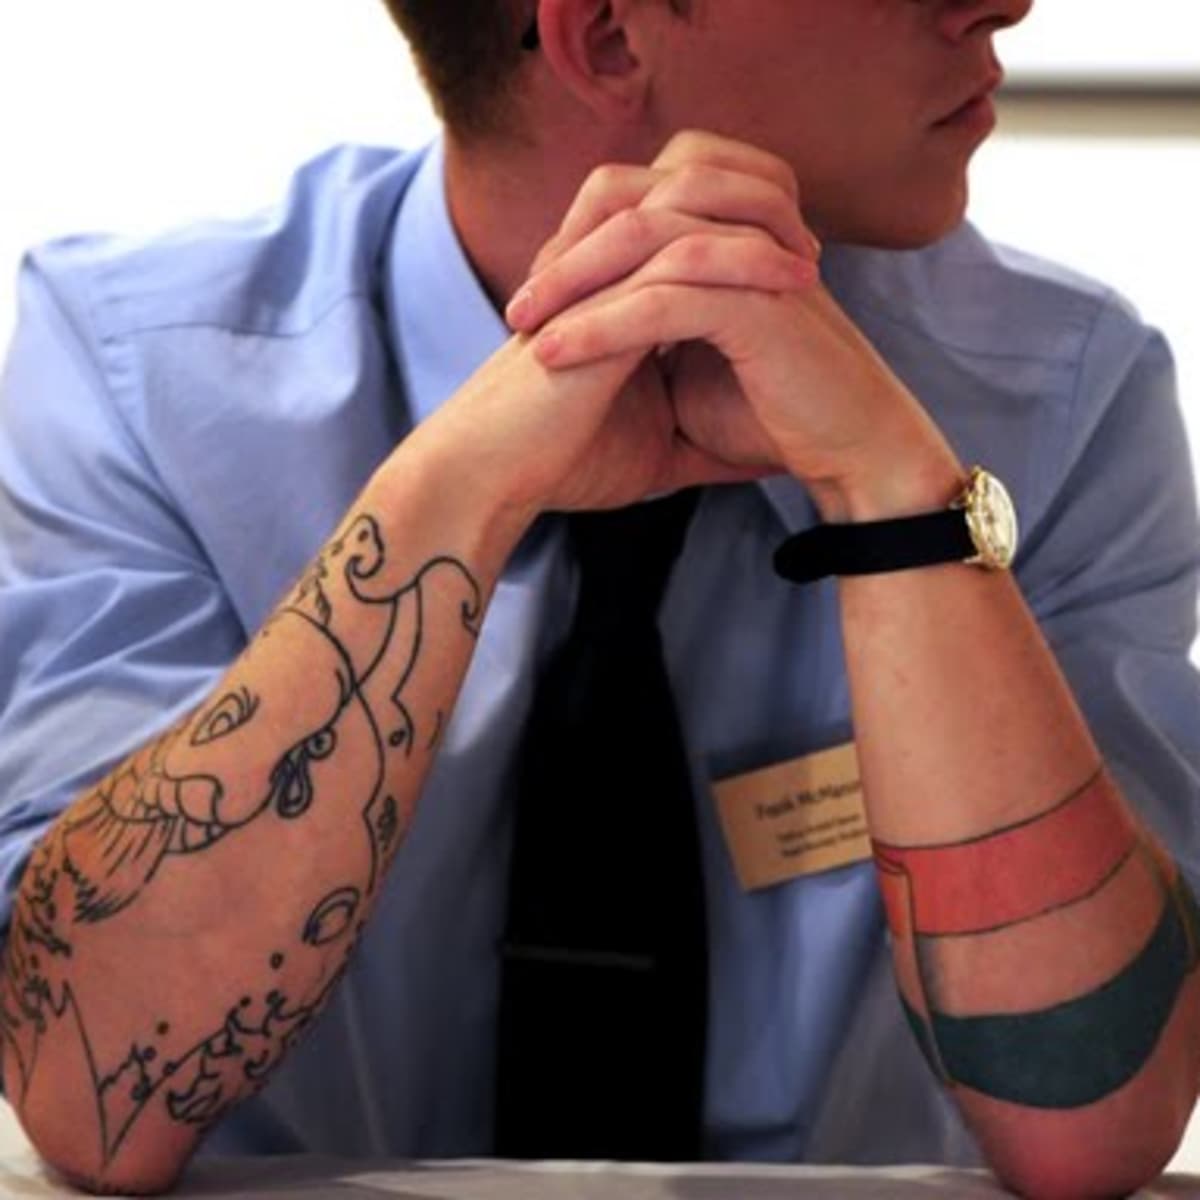 Should Heavily Tattooed People Be Given Good Jobs? | Long sleeve tshirt  men, Personal presentation, Tattoos in the workplace